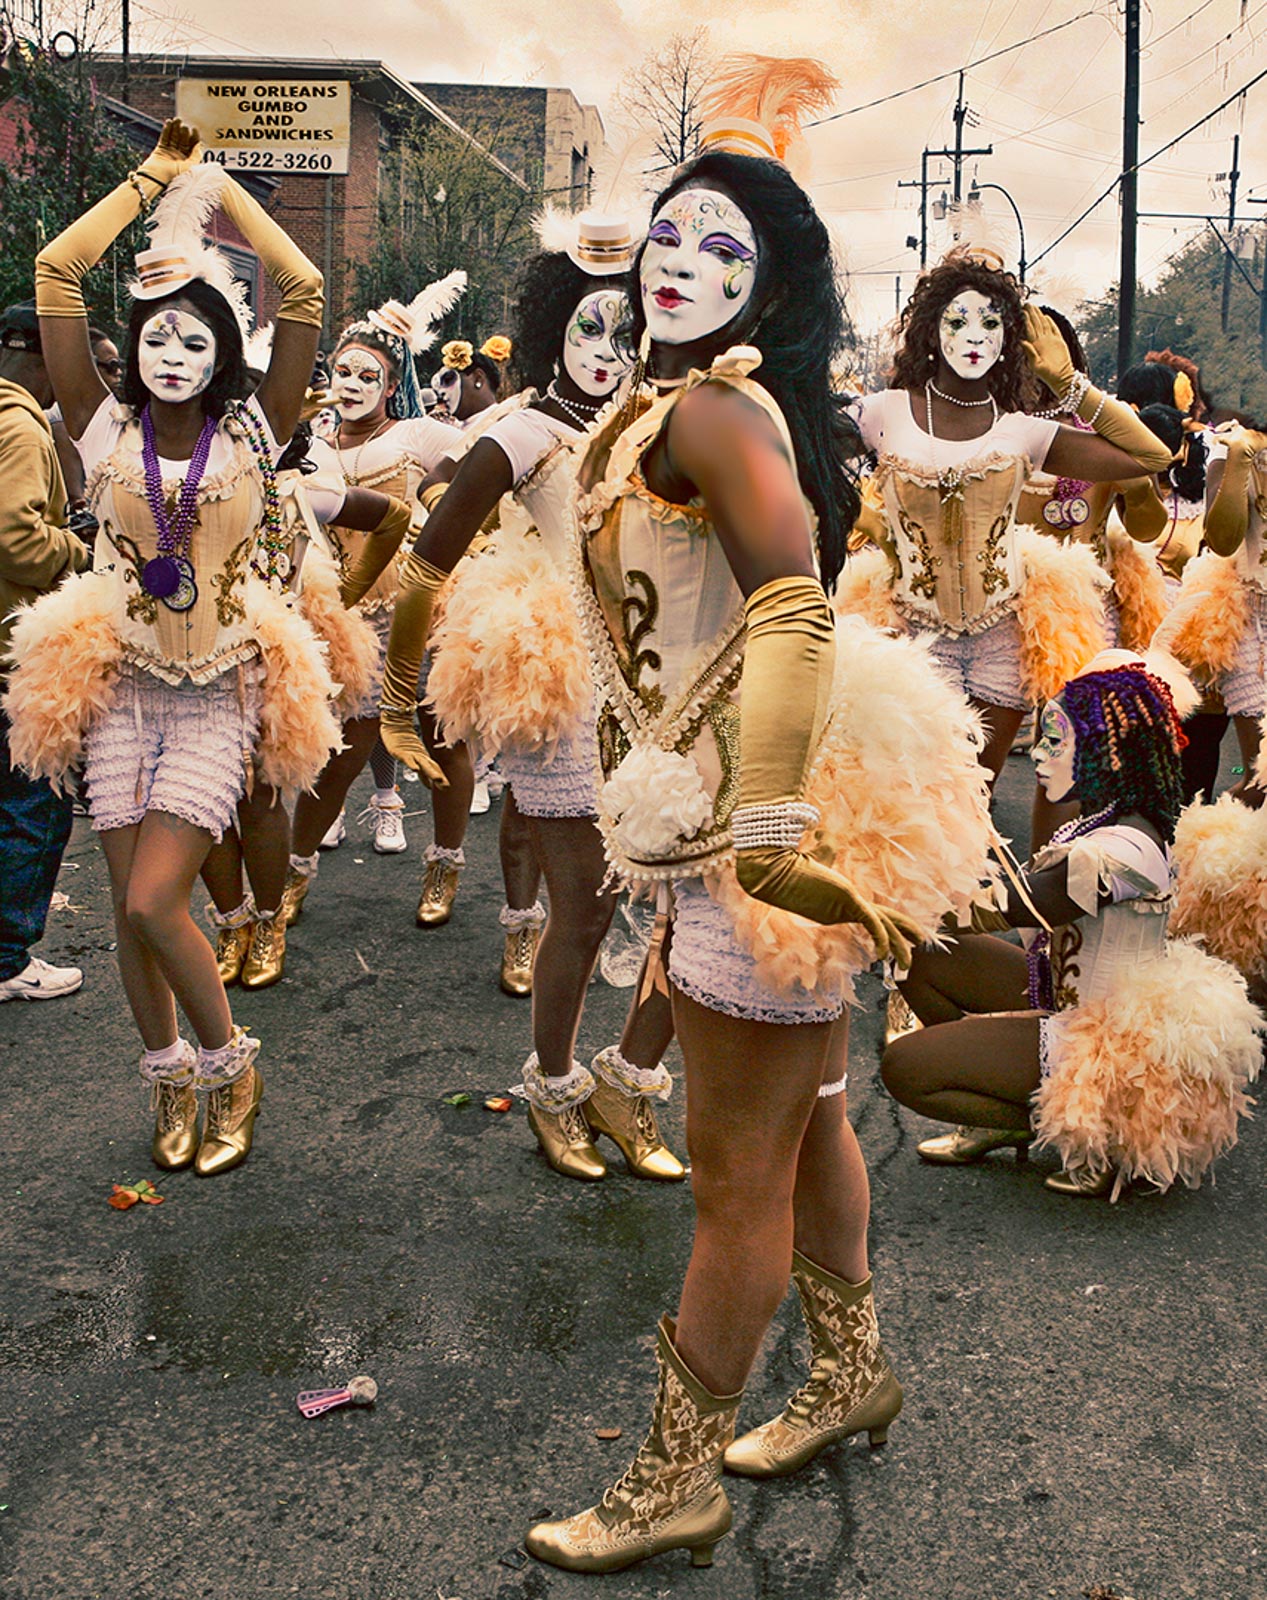 Melissia White's Baby Doll Ladies in the Zulu Parade on Mardi Gras 2012